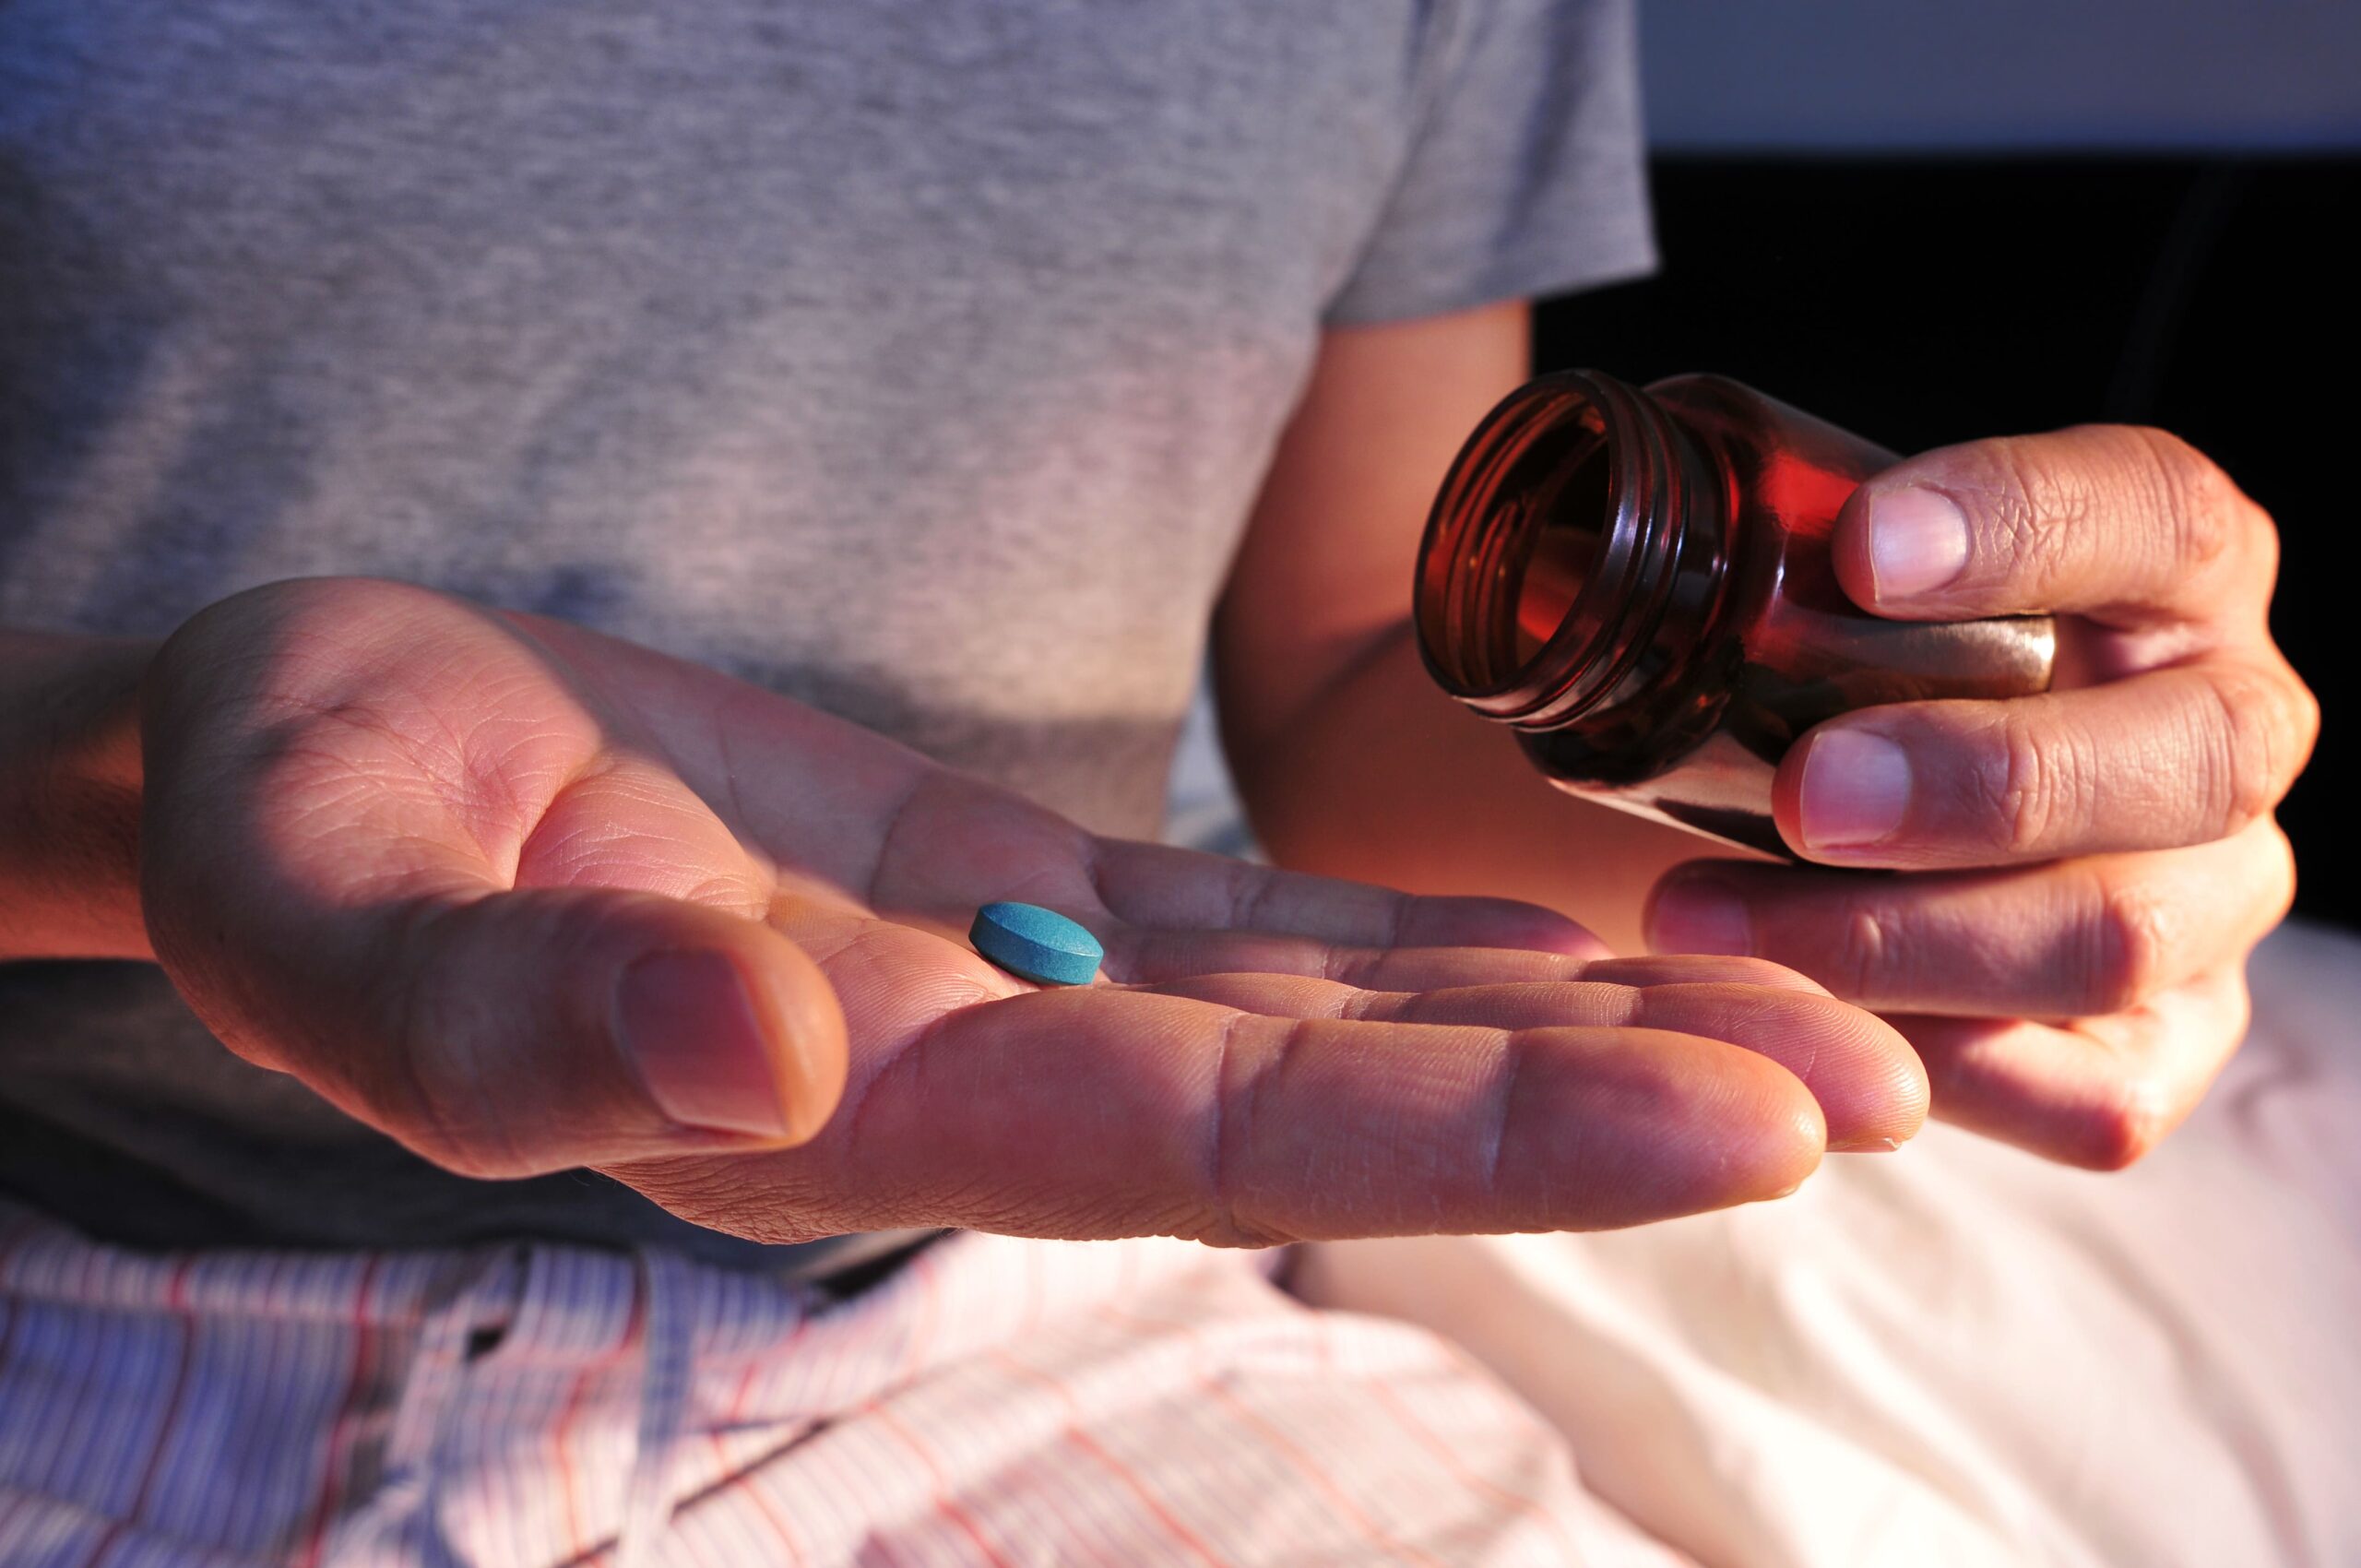 man taking a blue pill out of a container.